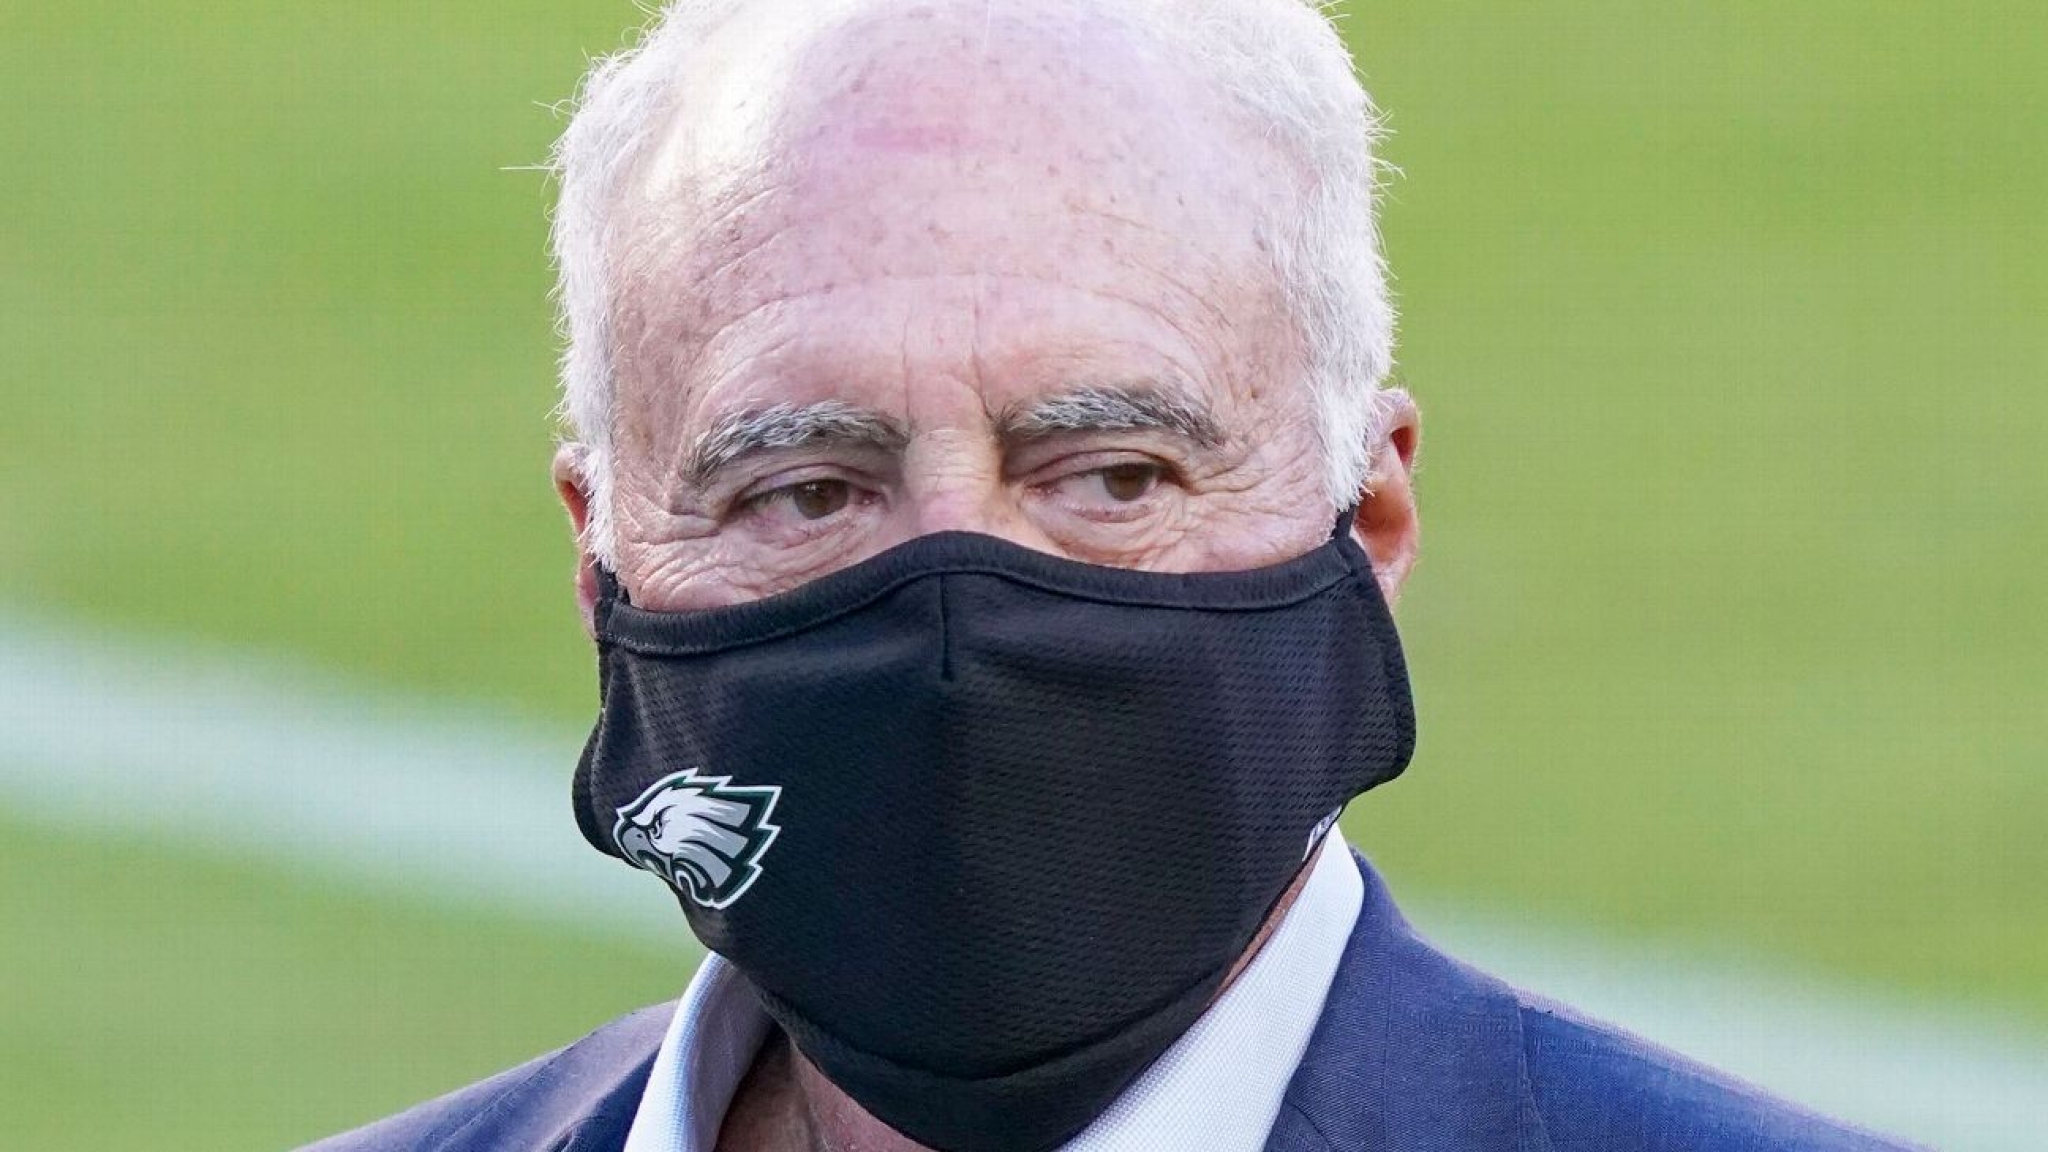 Has Eagles owner Jeffrey Lurie gone too far with quarterback directives?